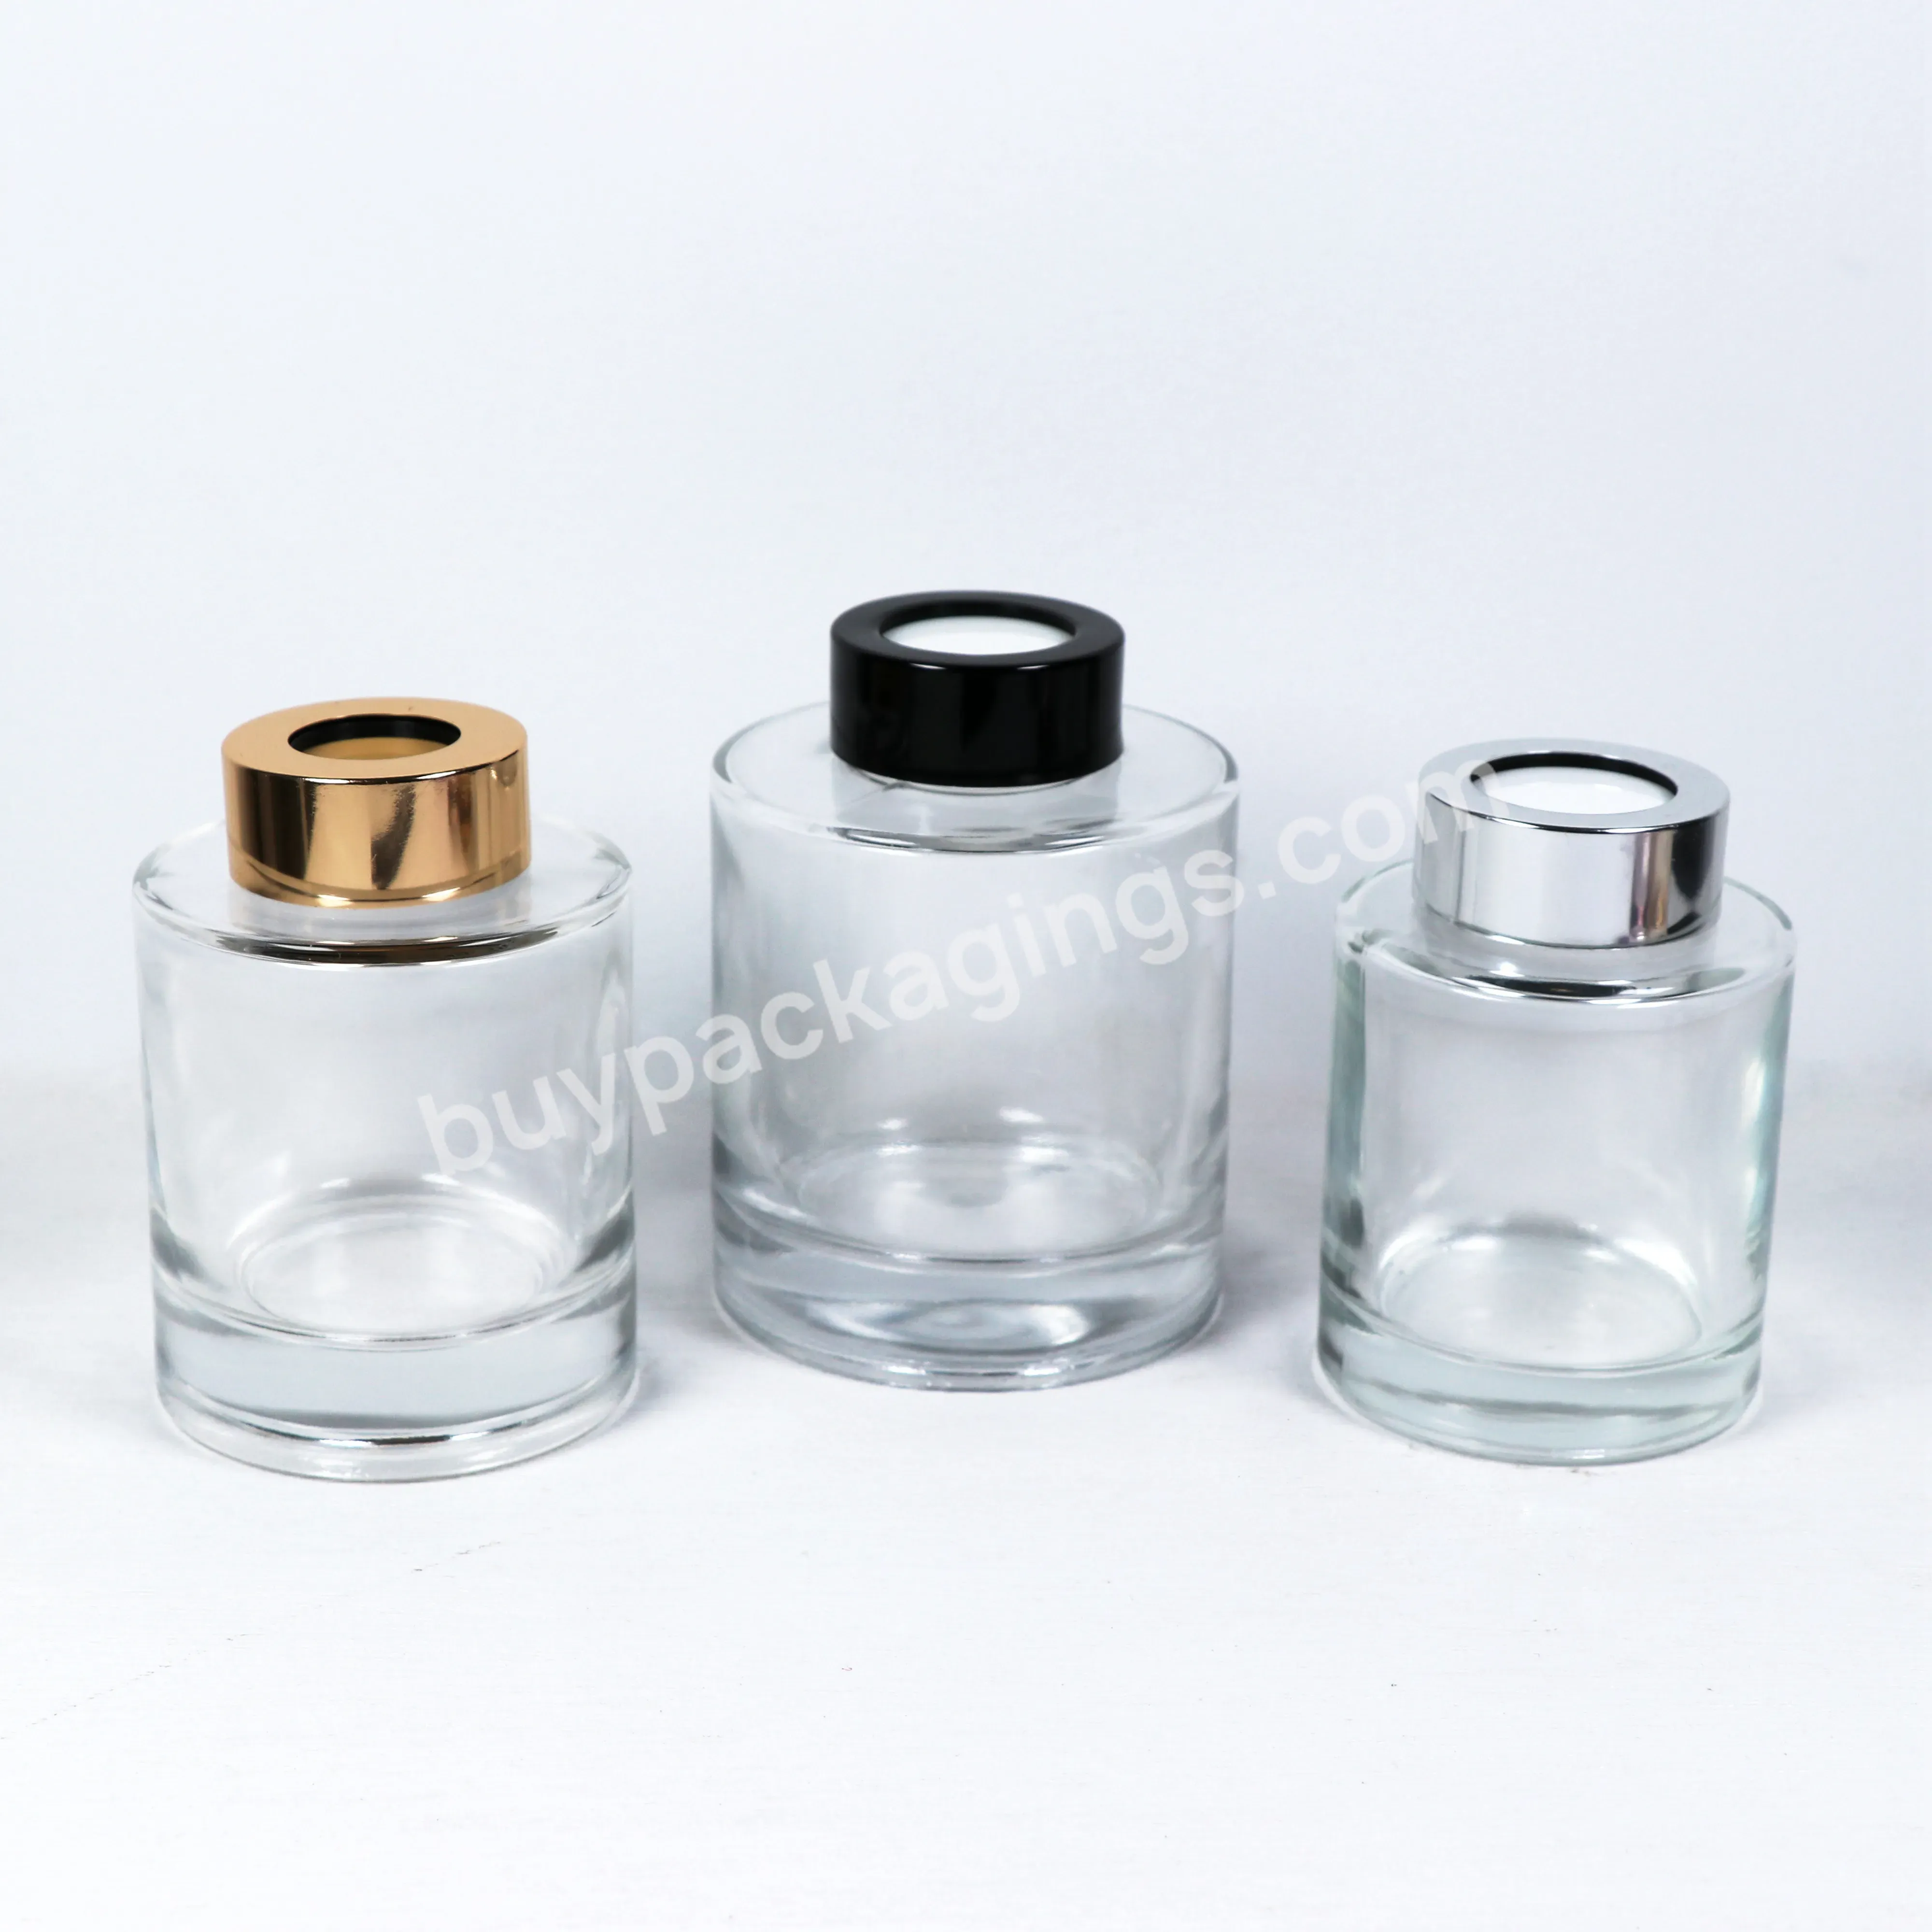 100ml 3oz Reed Diffuser Glass Bottle - Buy 100ml Reed Diffuser Glass Bottle,3oz Reed Diffuser Glass Bottle,Reed Diffuser Bottle 100ml.